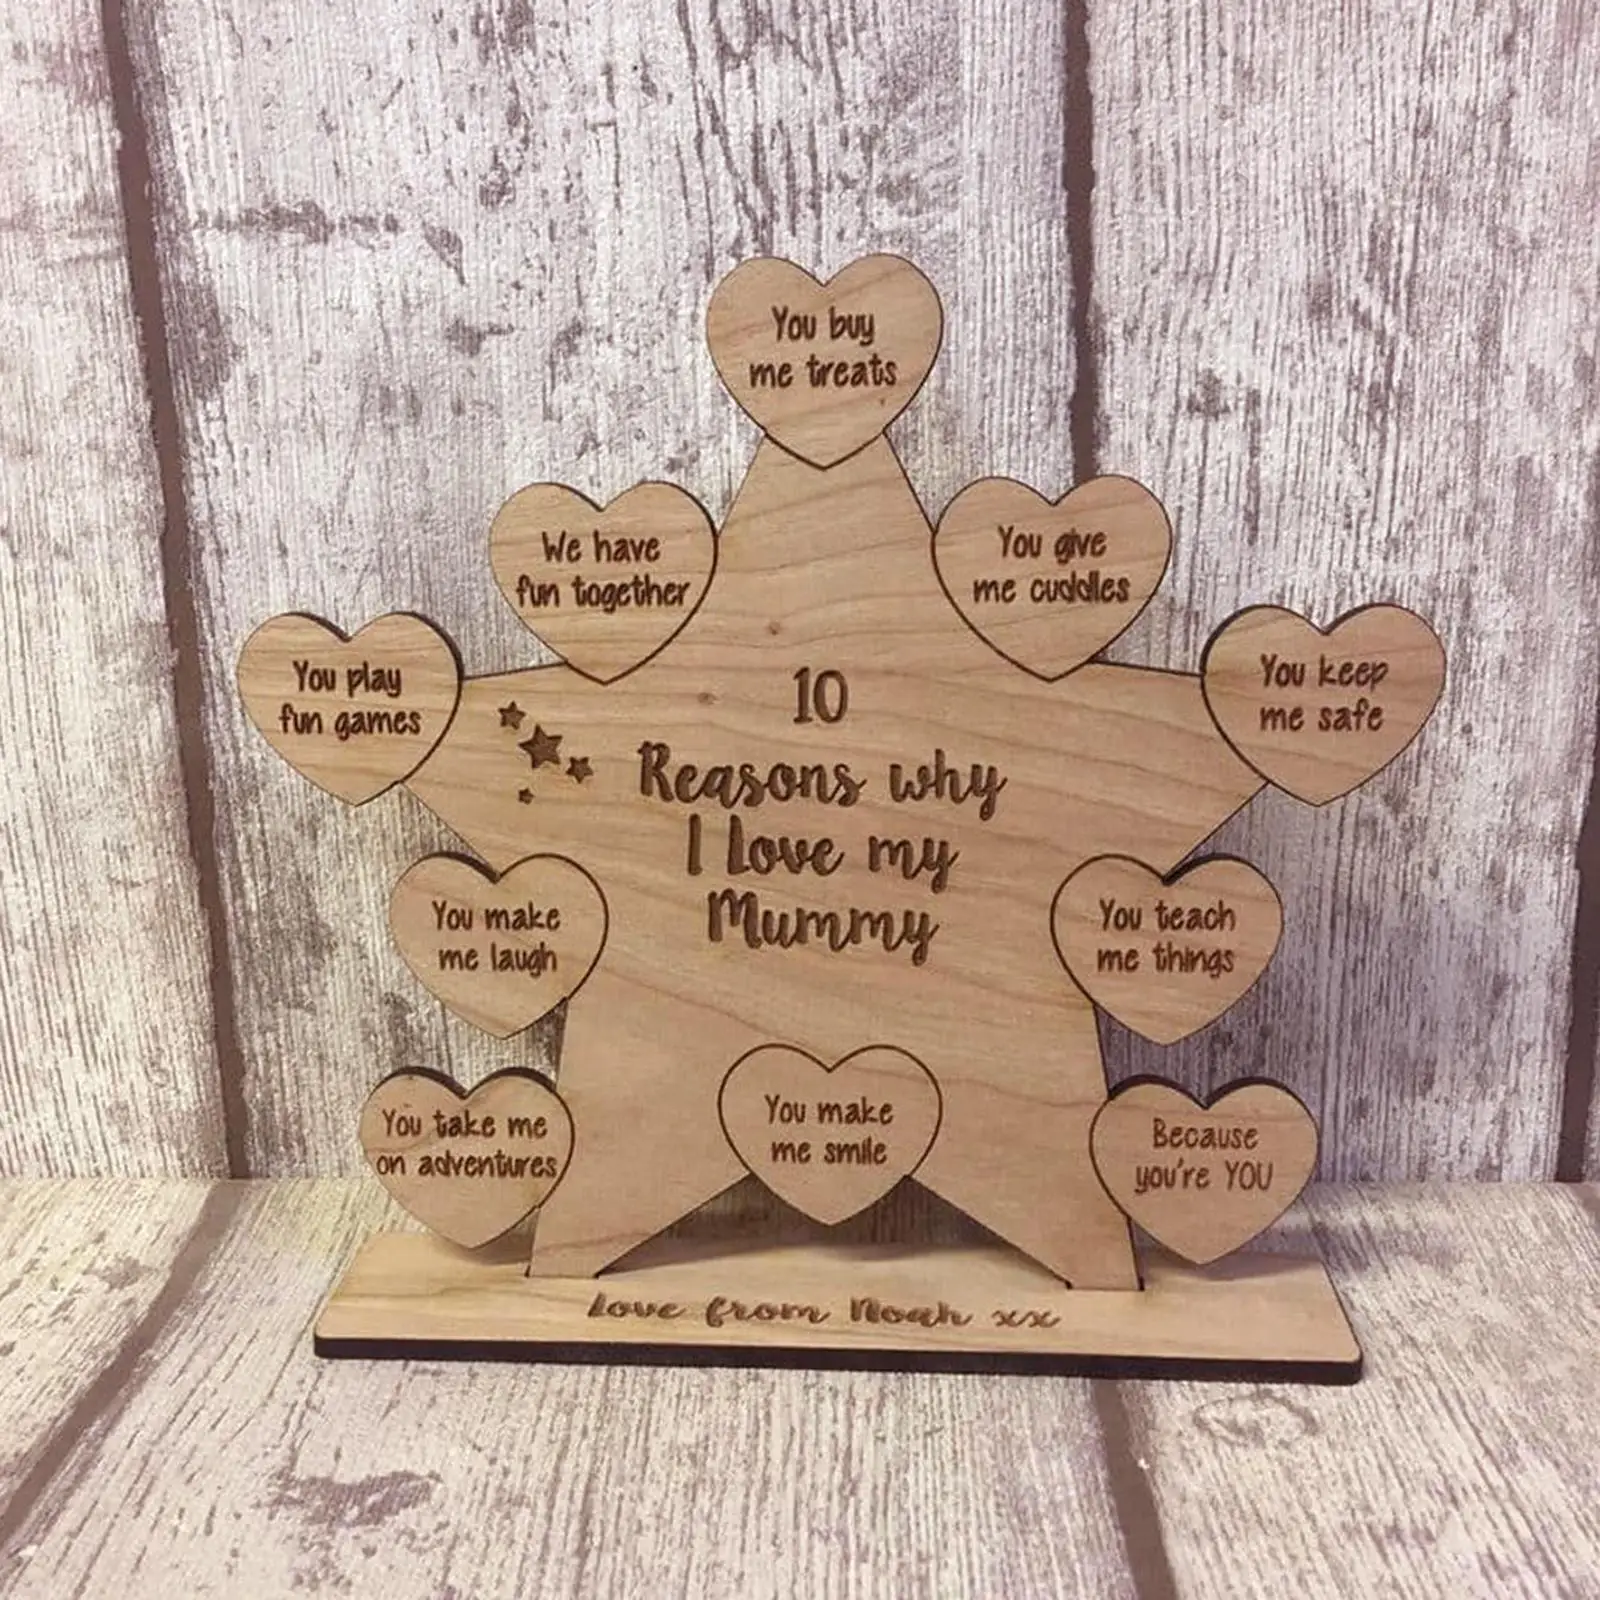 Handmade Wooden Mothers day Decorations 10 Reasons Why I Love My Mum Sign Women Ladies Wife Anniversary Gift Home Decor